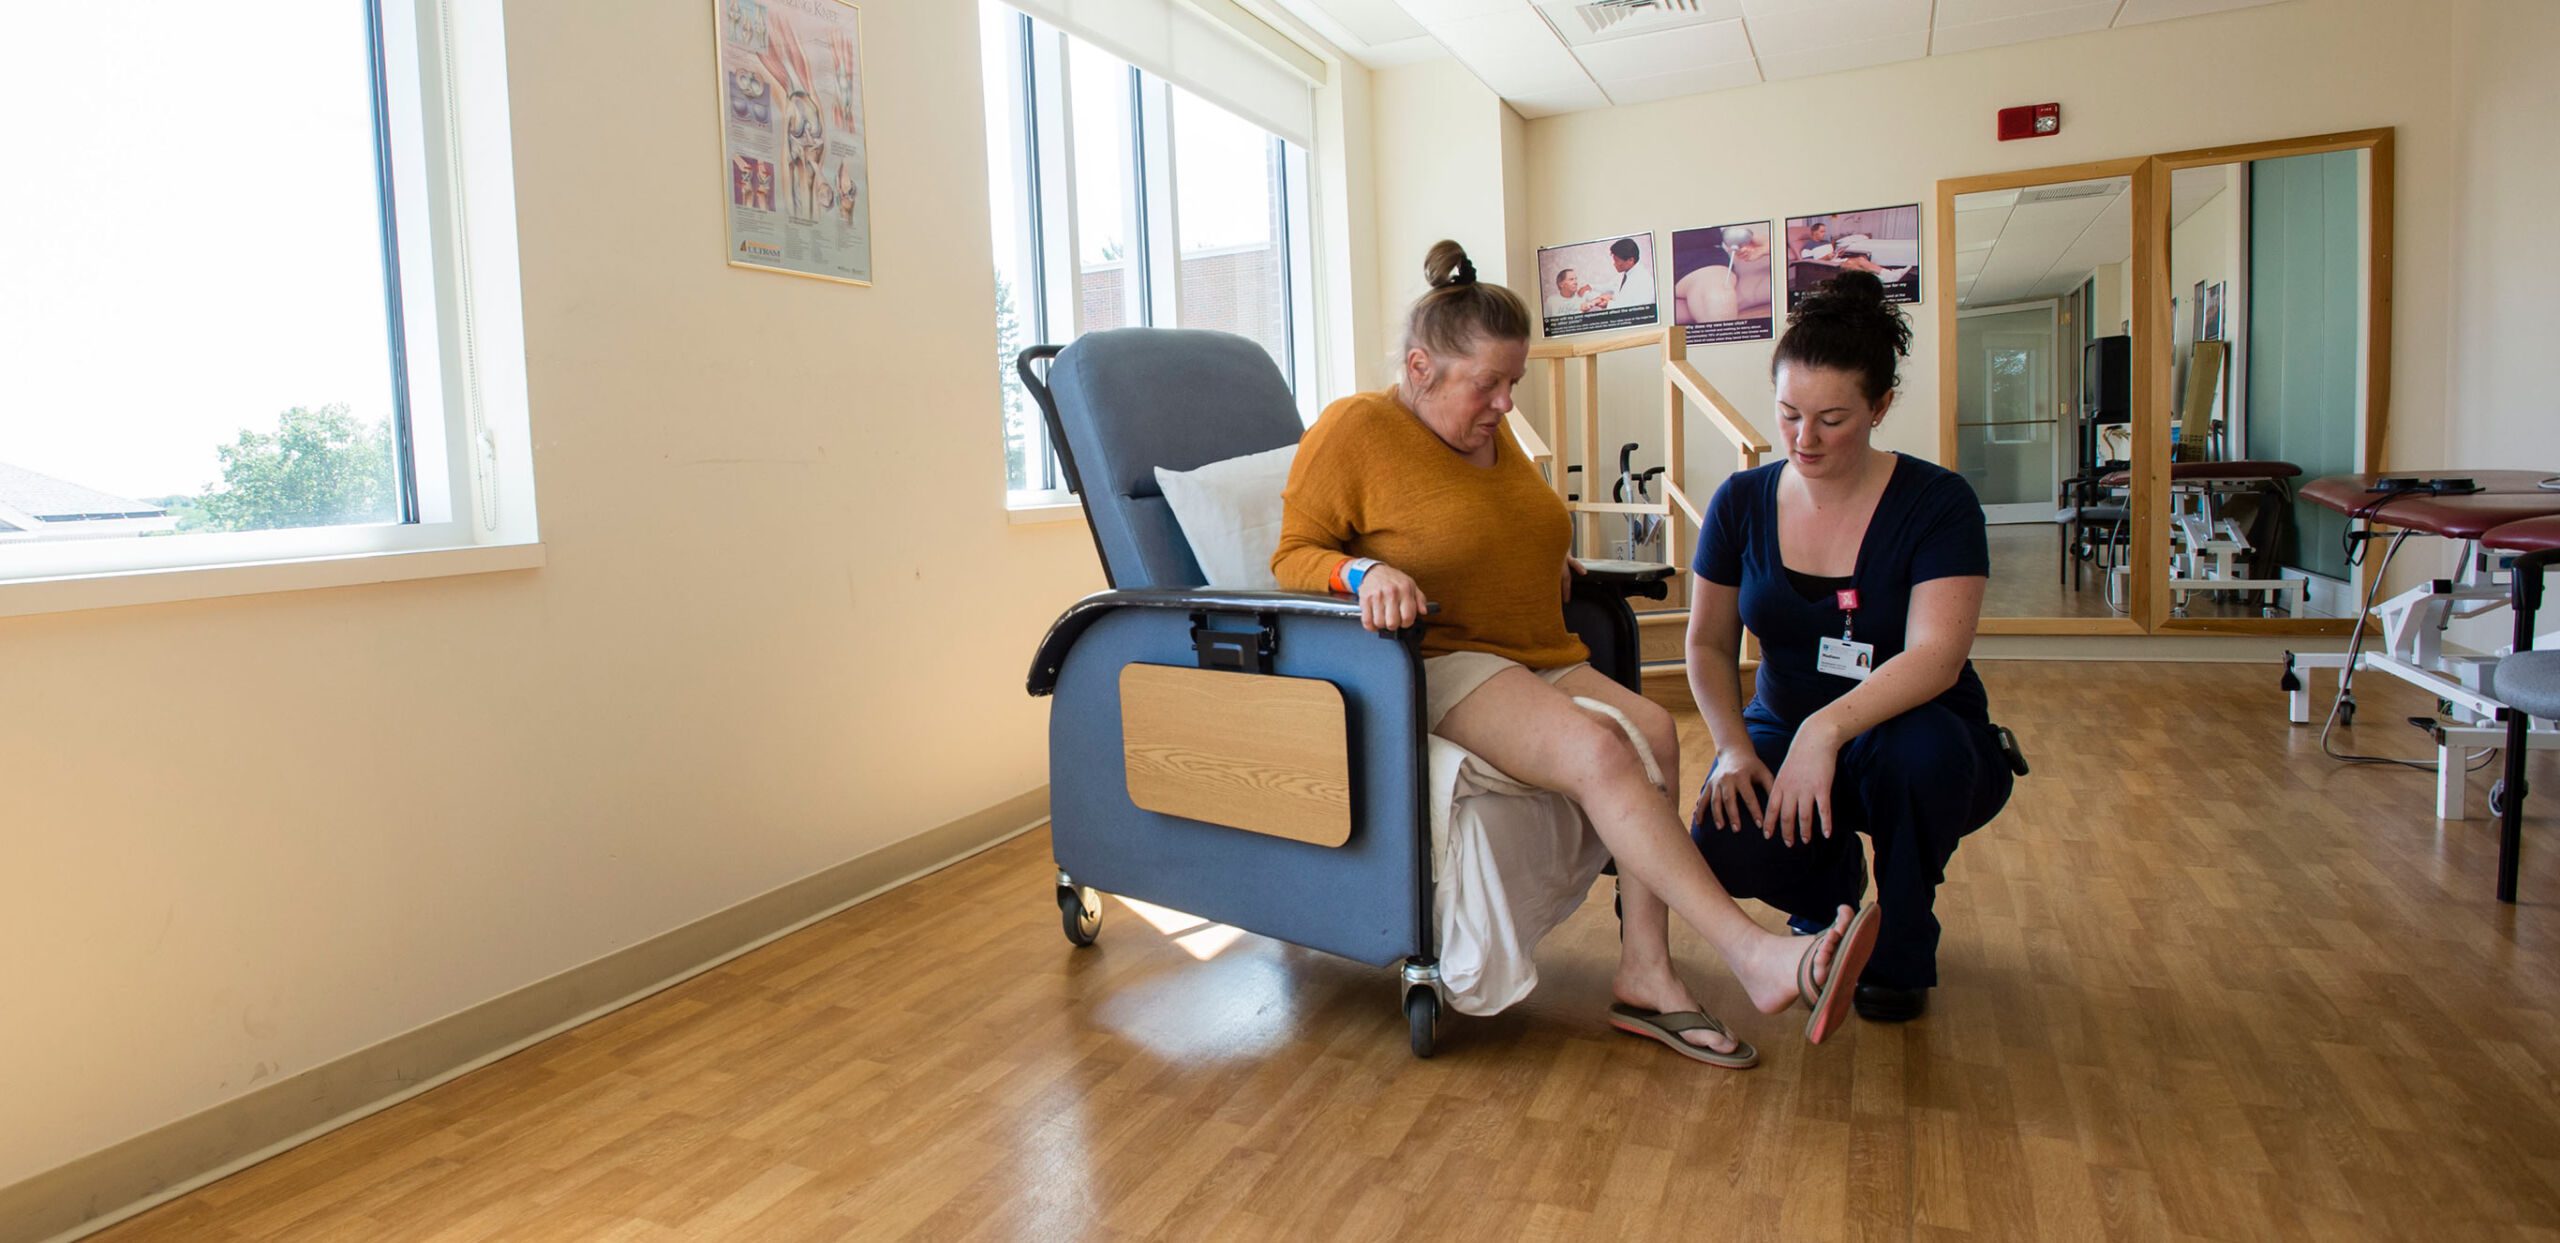 Physical therapist talks with female patient, Cooley Dickinson Medical Group Orthopedics and Sports Medicine, West Hatfield, MA 01088.